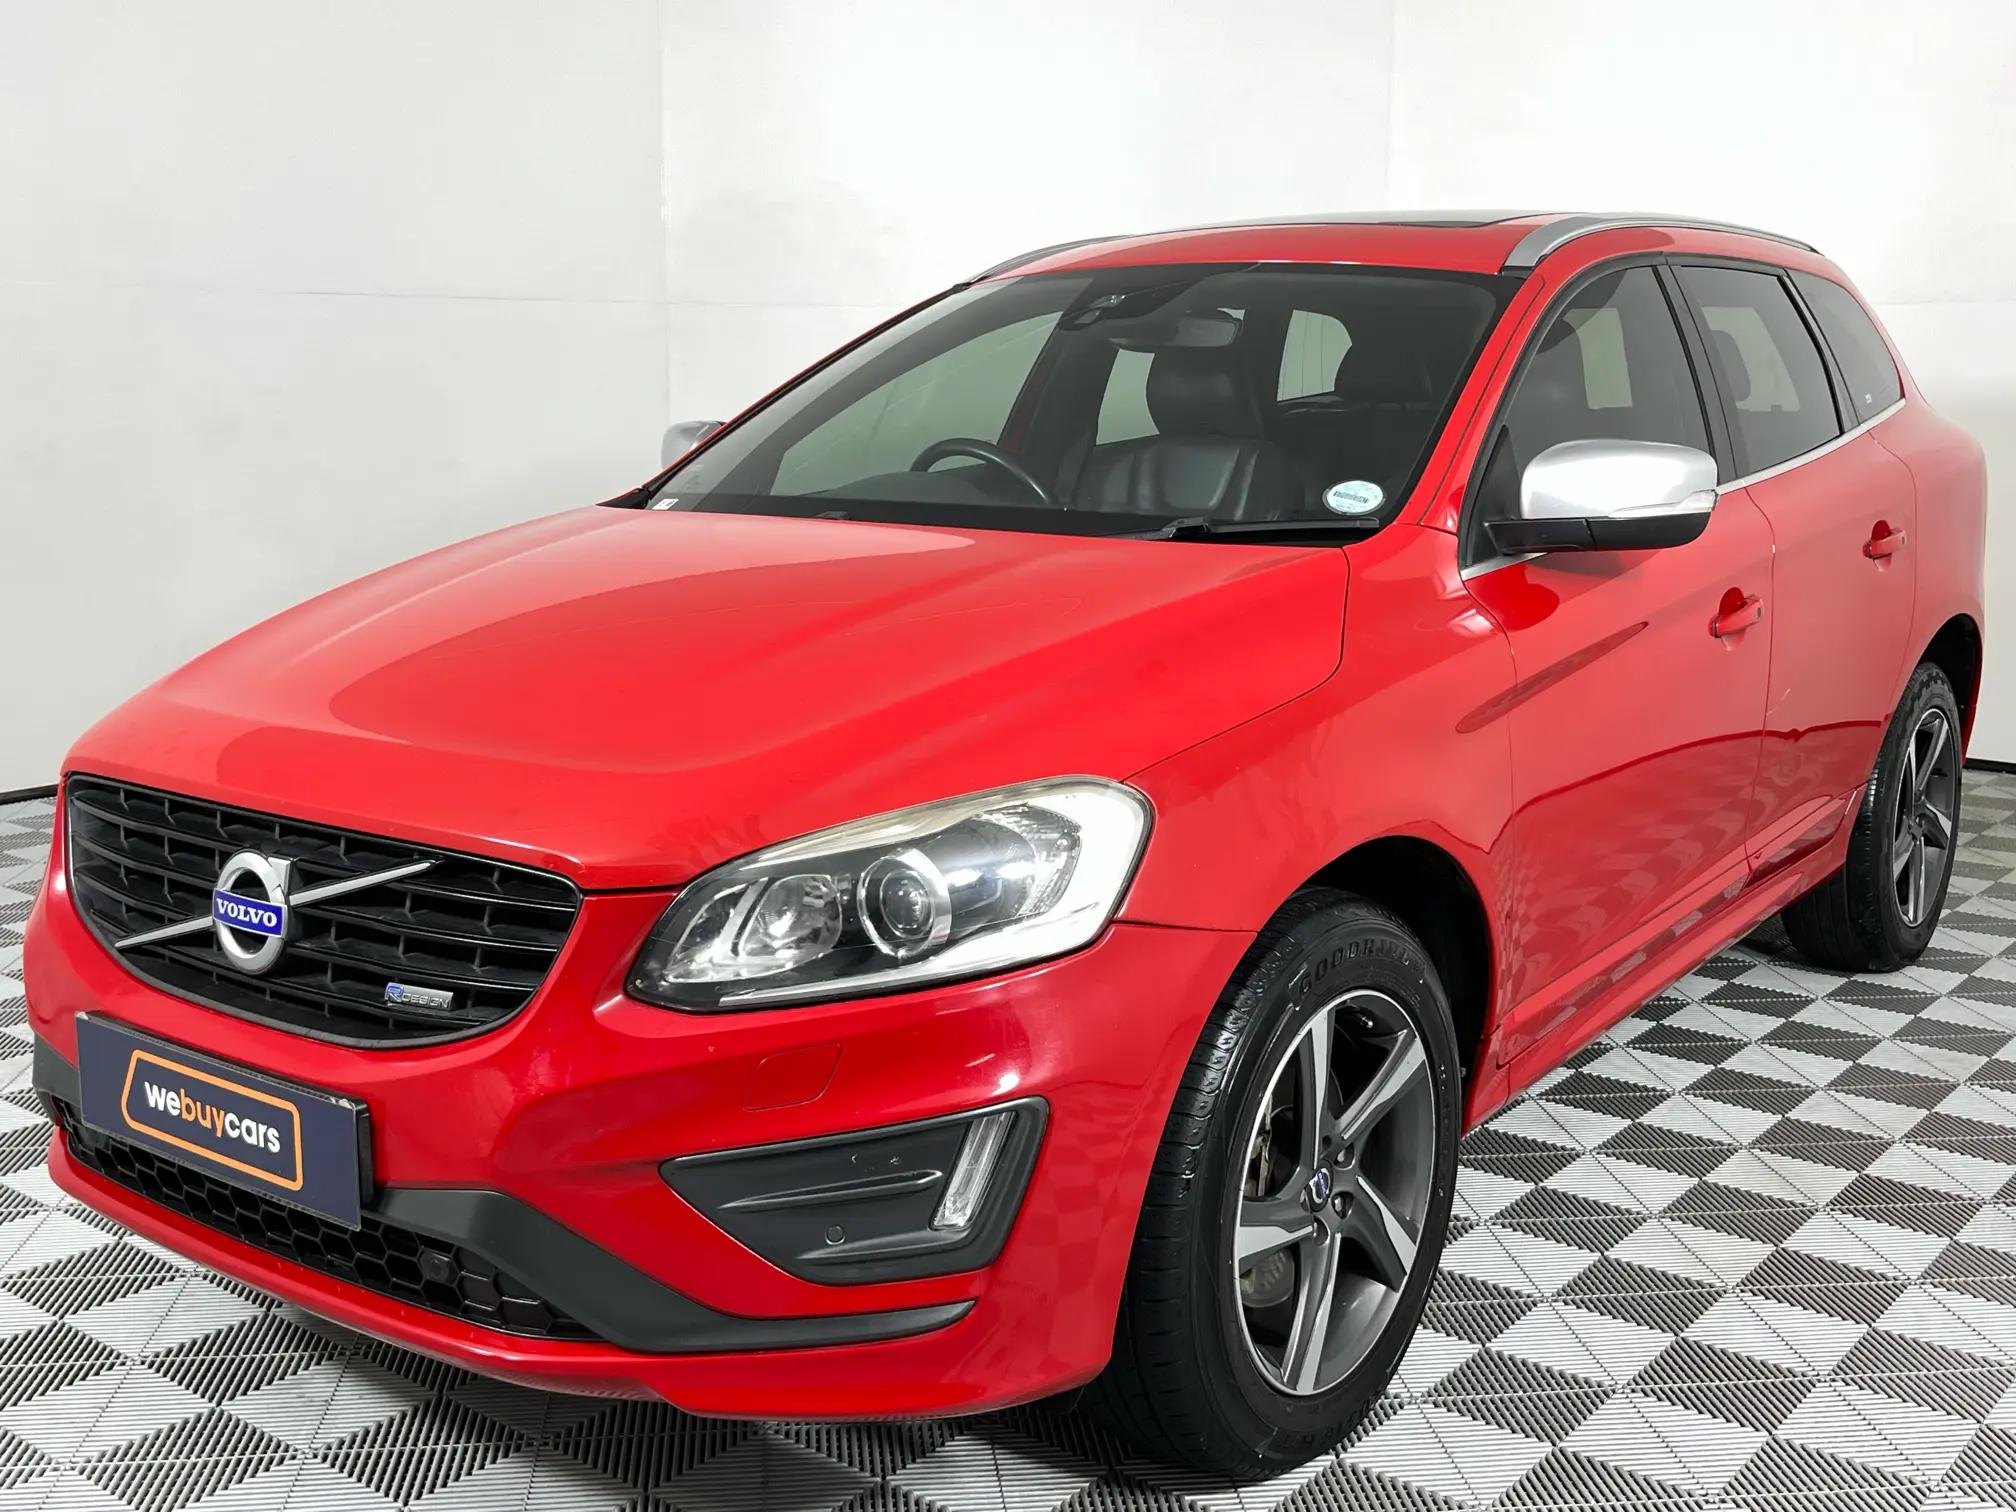 Volvo XC60 T5 R-Design Geartronic 